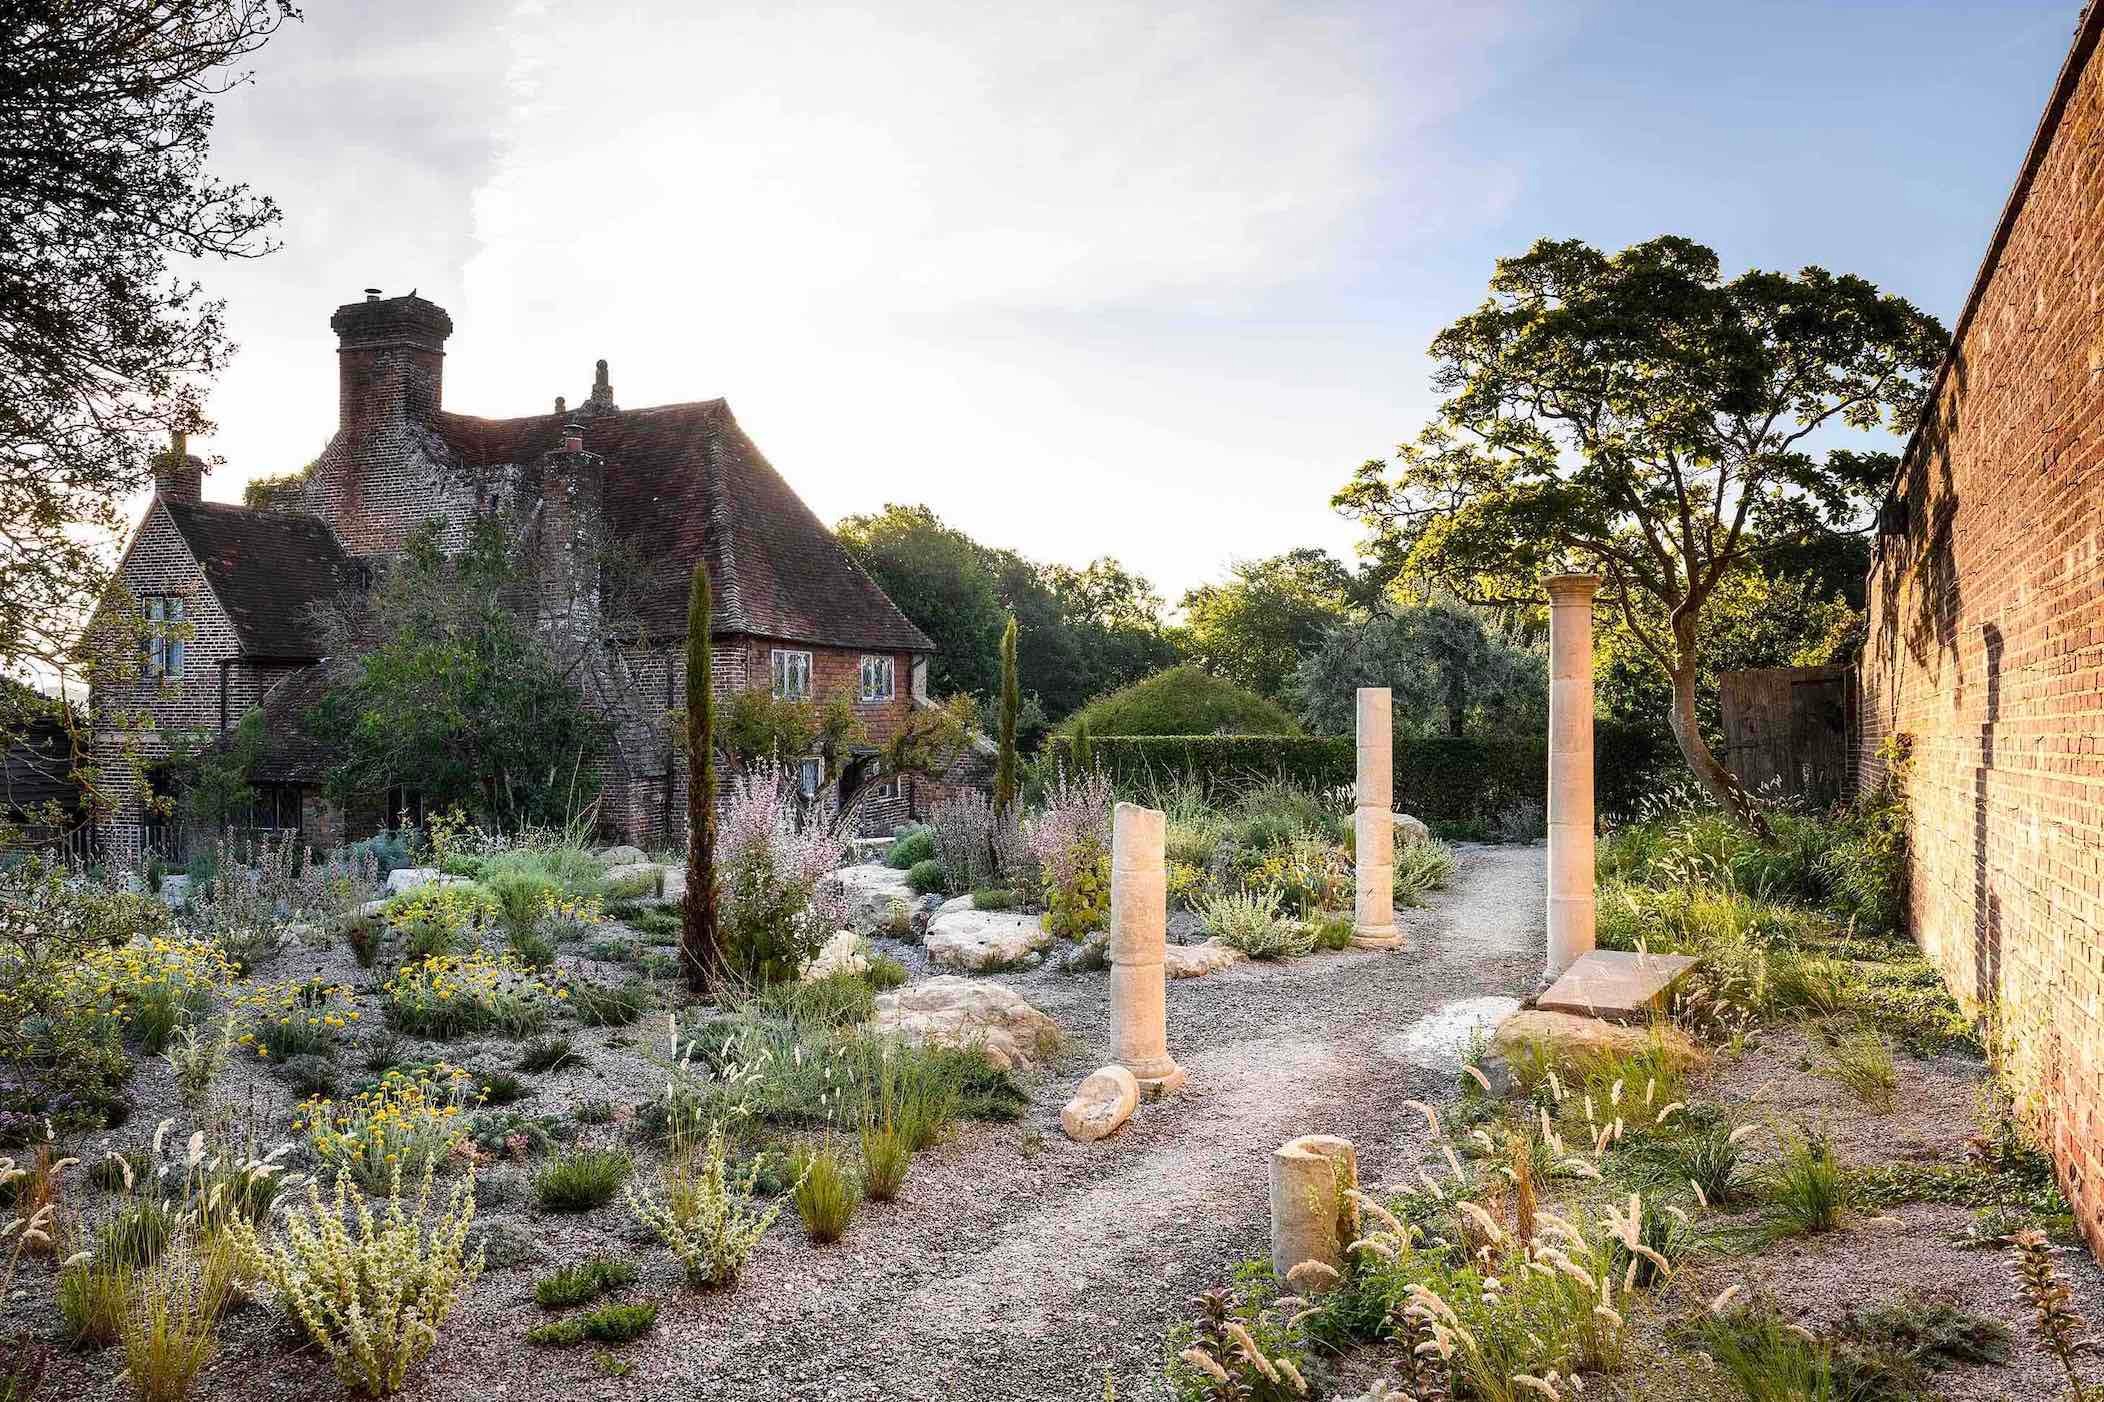 The stone columns, which came from High Wall, a Harold Peto-designed garden in Oxfordshire, have been reconstructed here, just as they have been on the island of Delos, to give a sense of original architecture, supported by ground-level planting that evokes the Greek phrygana